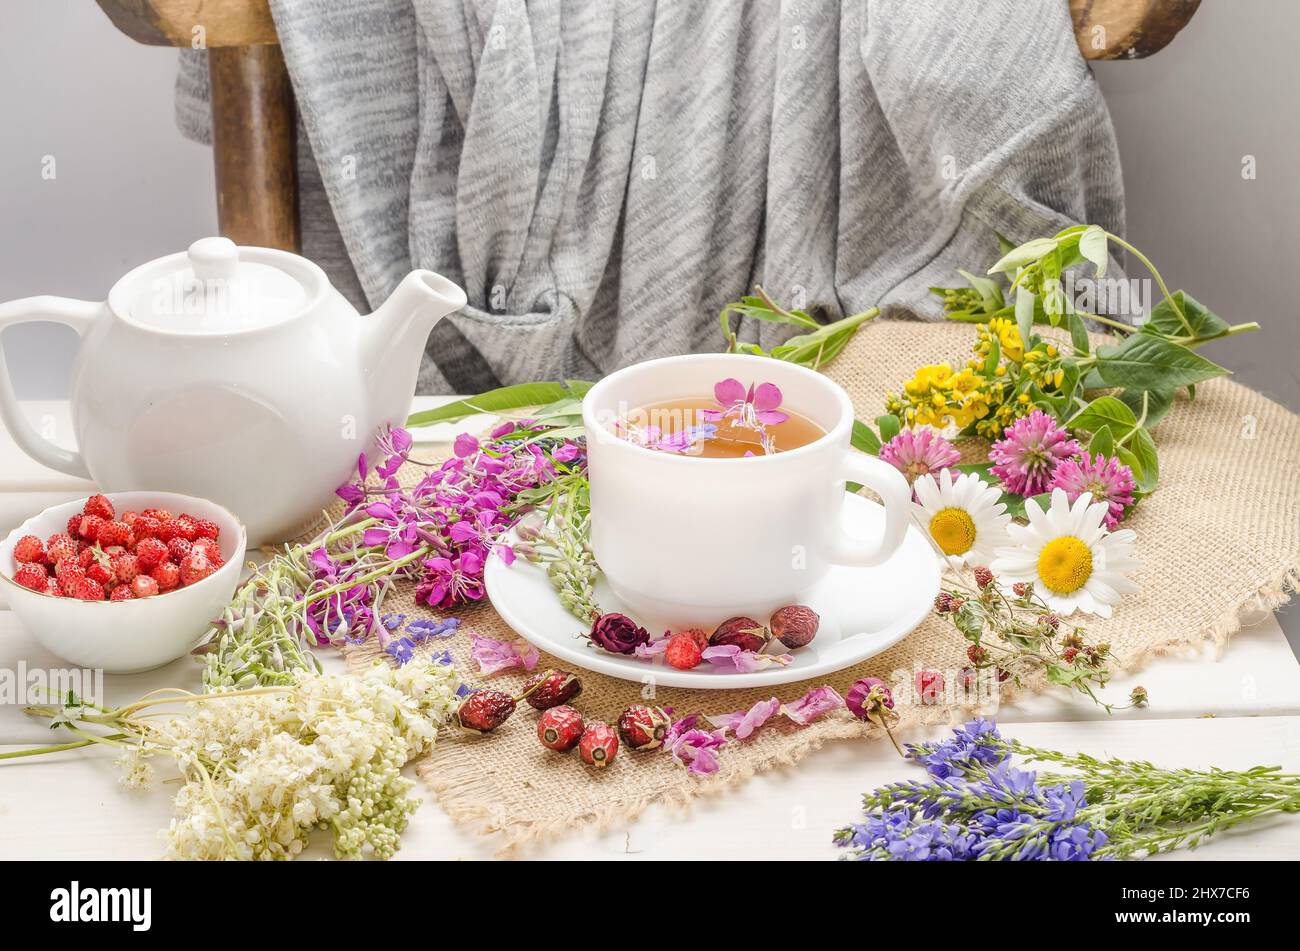 Herbal tea with rosehip, chamomile and clover in a white cup on a white wooden table with flowers. Stock Photo